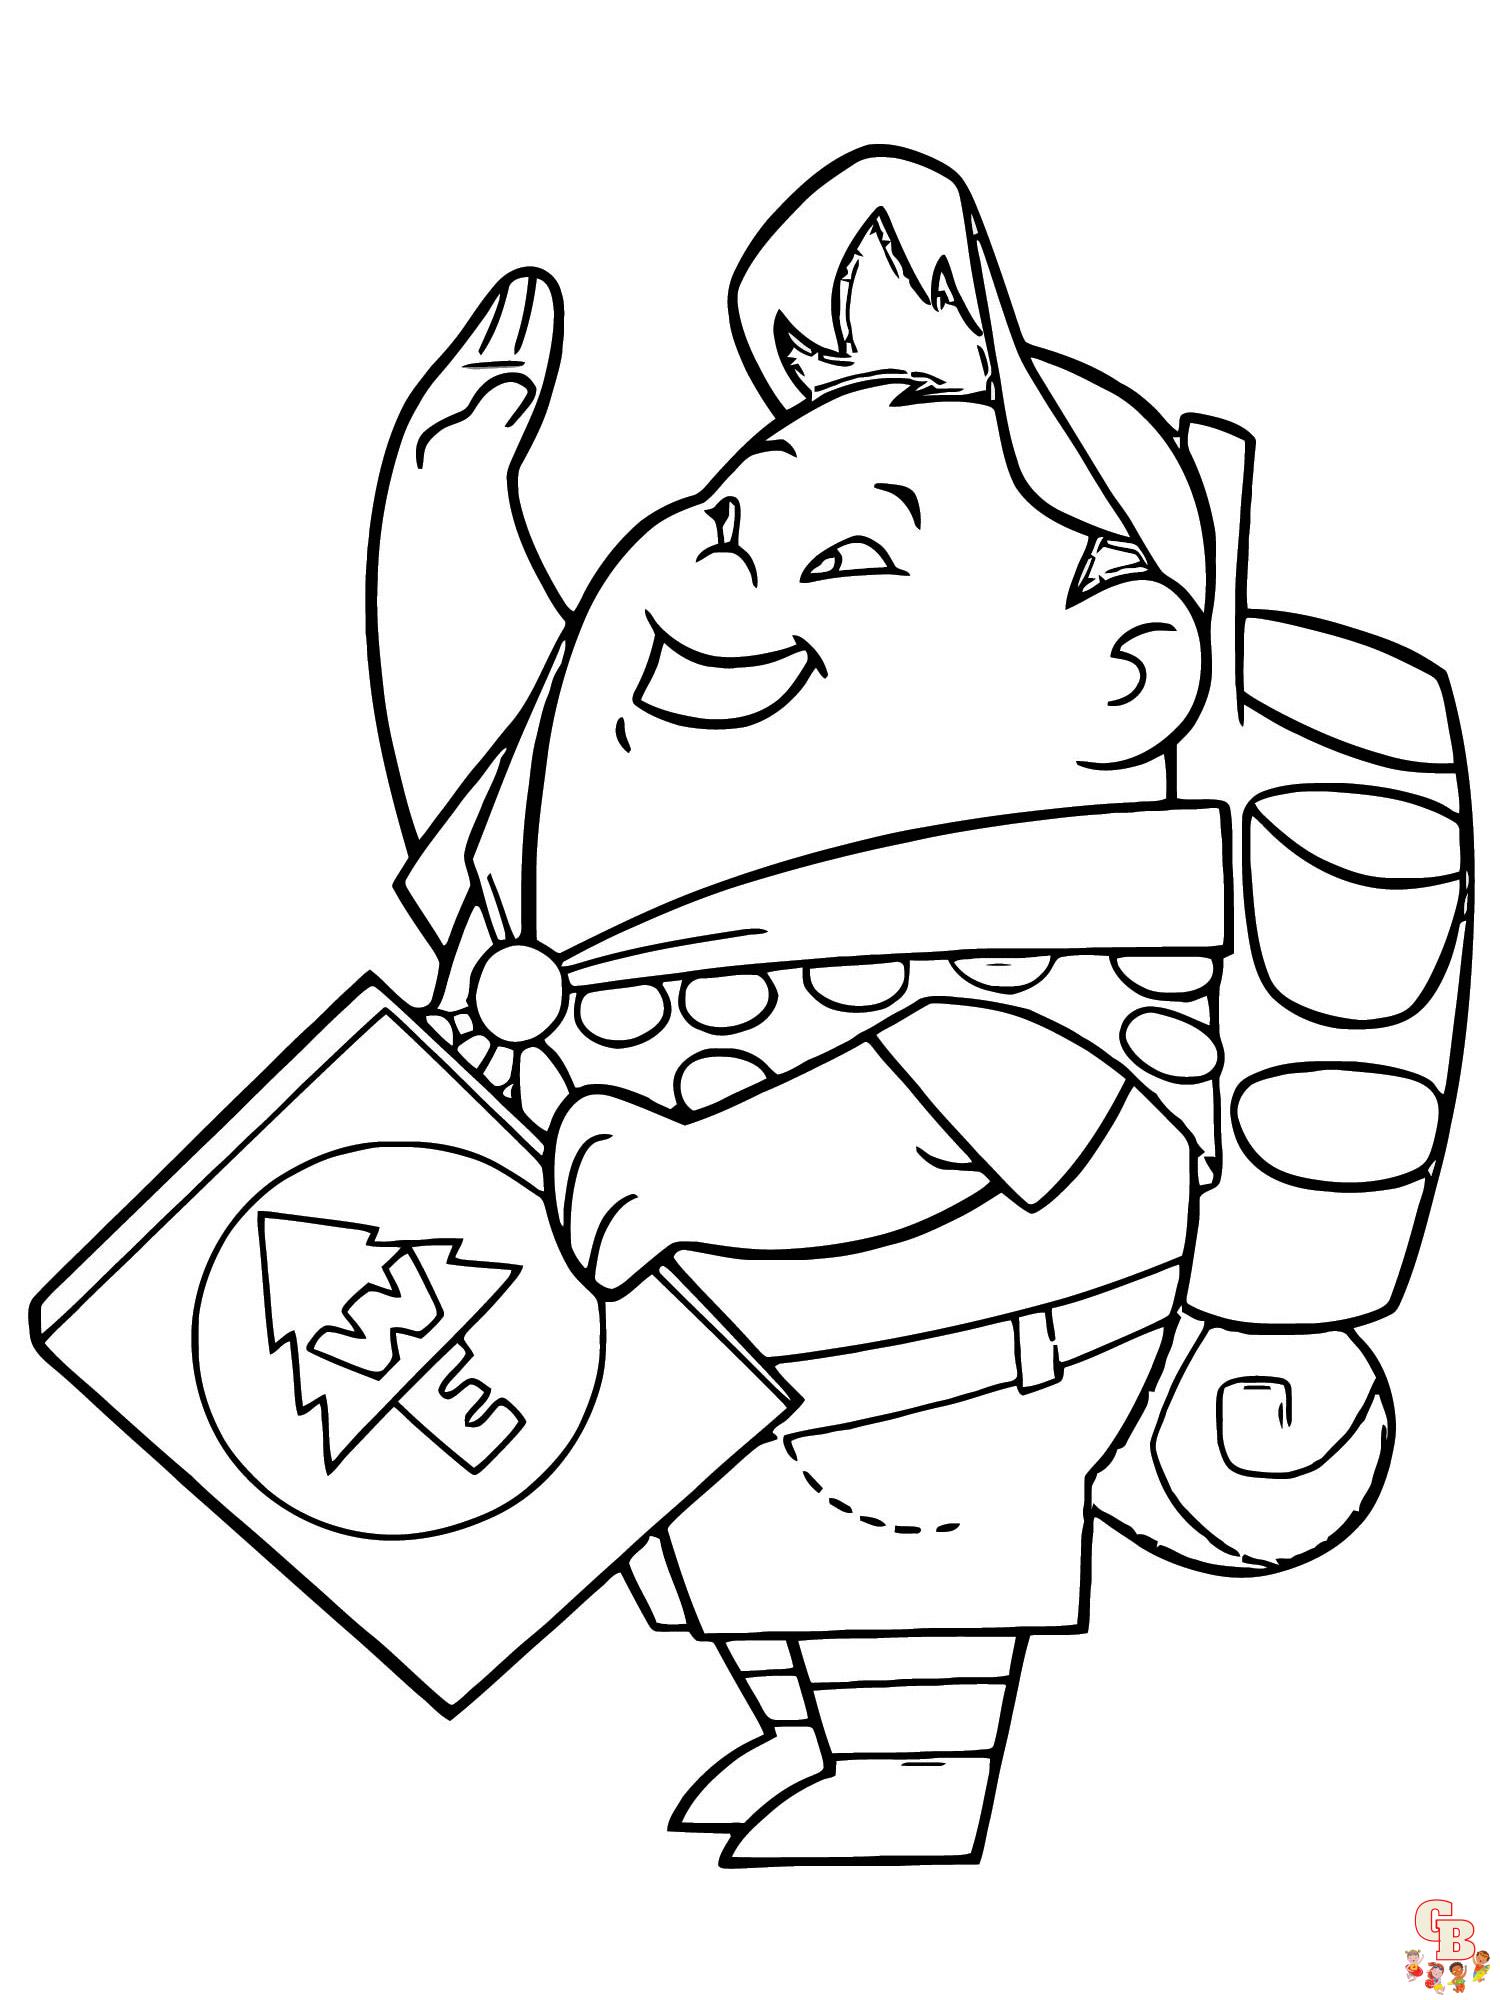 Up coloring pages 38